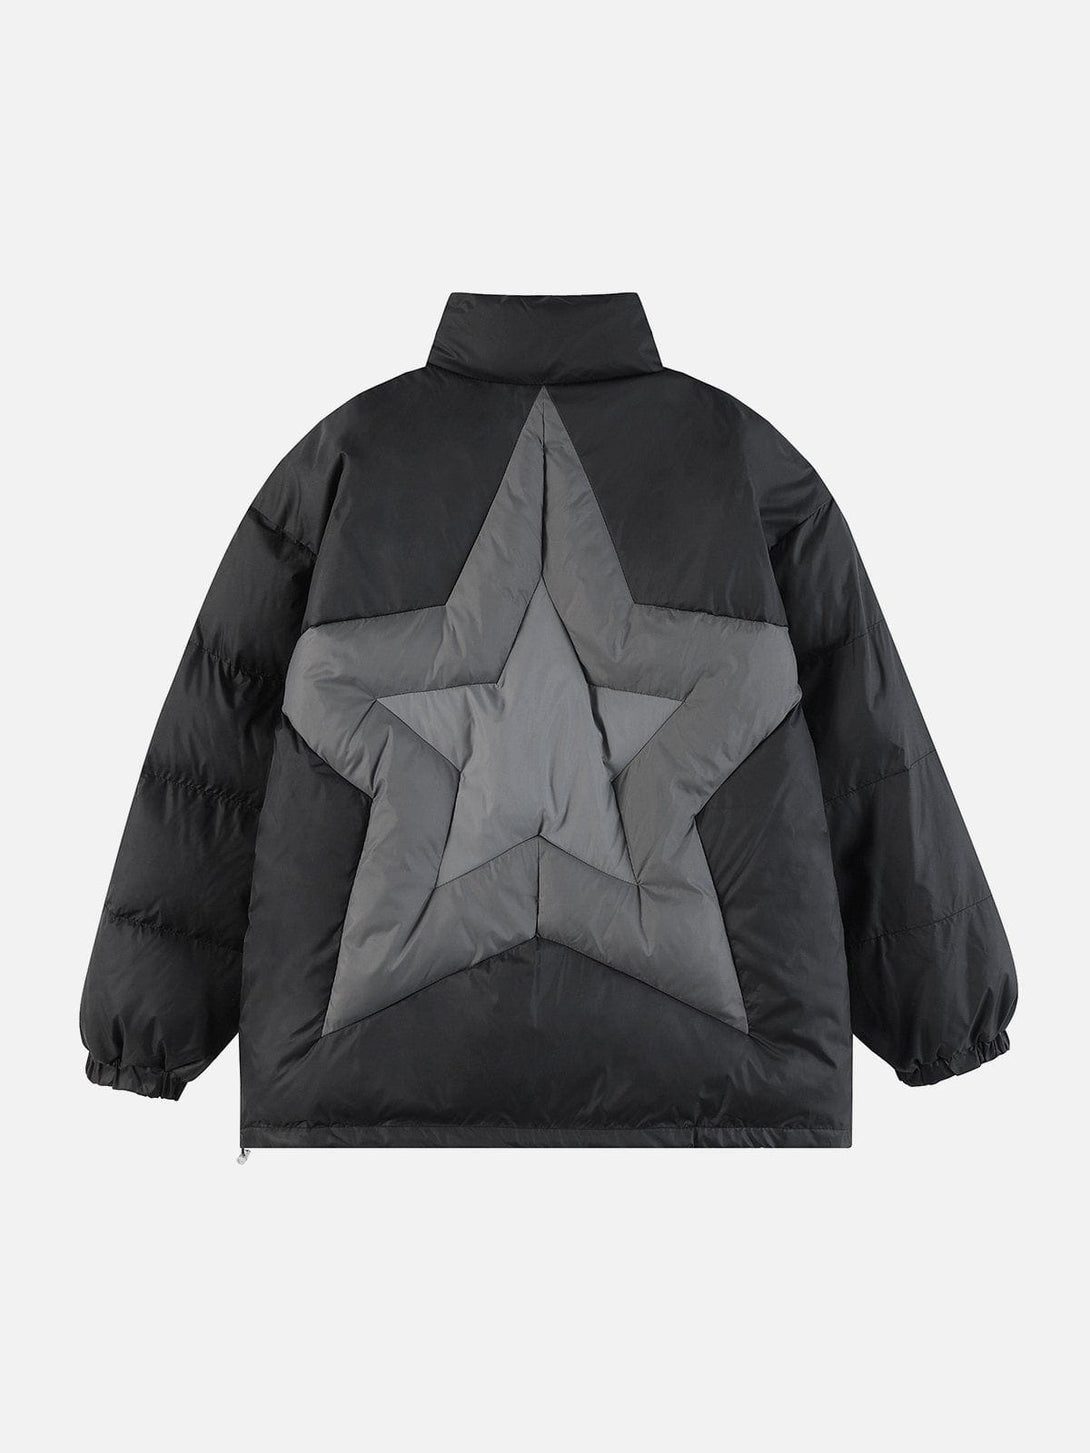 Majesda® - Star Patchwork Gradient Winter Coat outfit ideas streetwear fashion